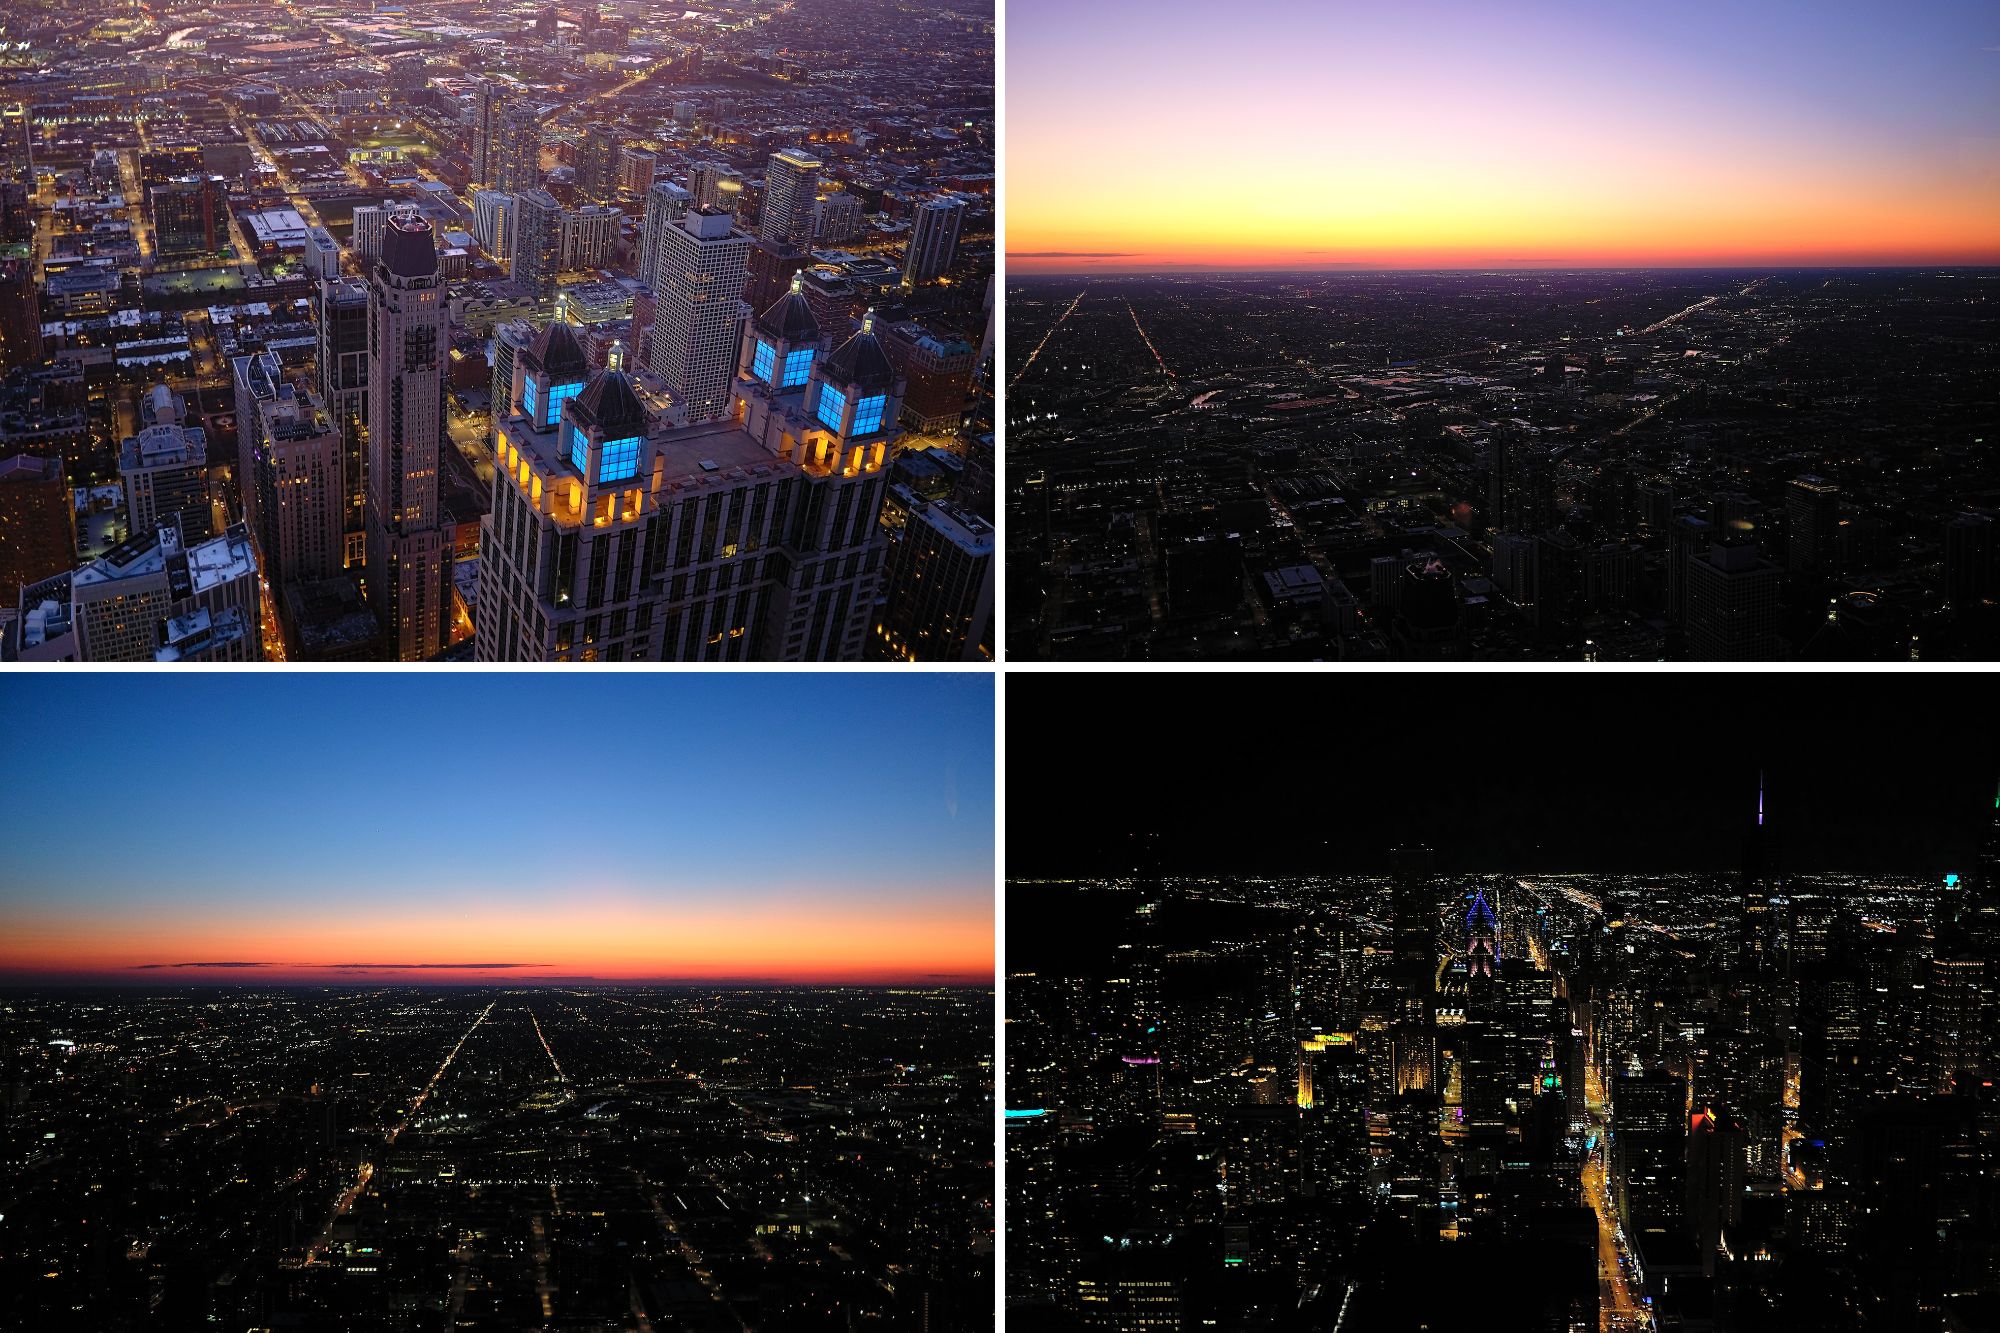 Collage of the sun setting over the buildings of Chicago